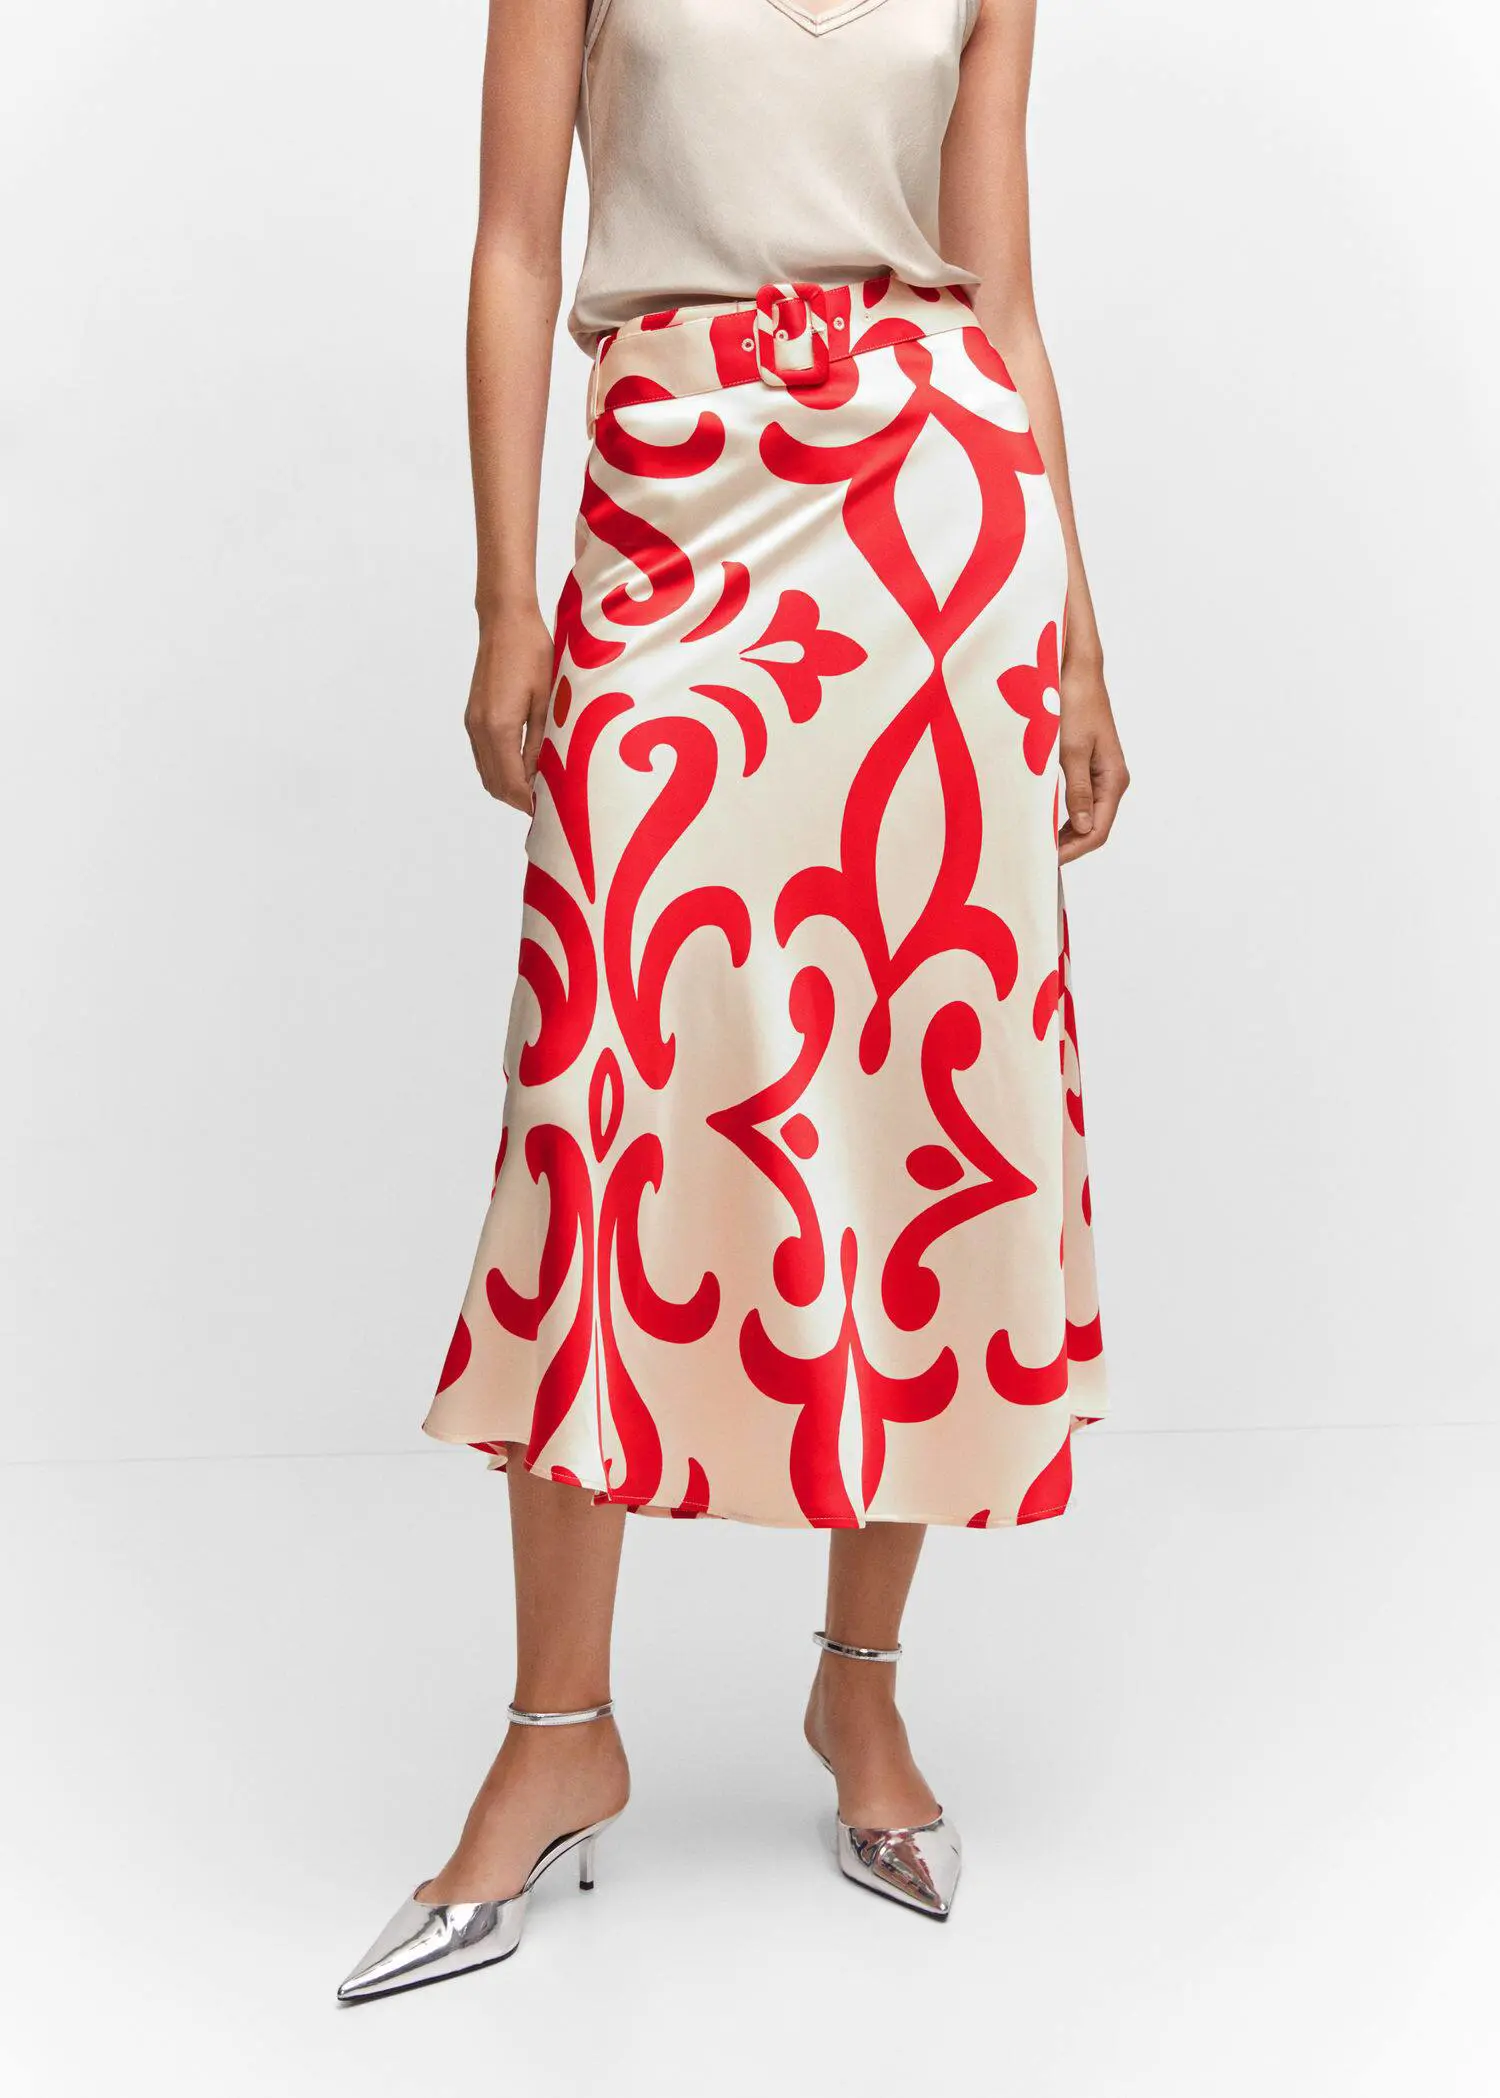 Mango Belt printed skirt. a woman wearing a red and white patterned skirt. 